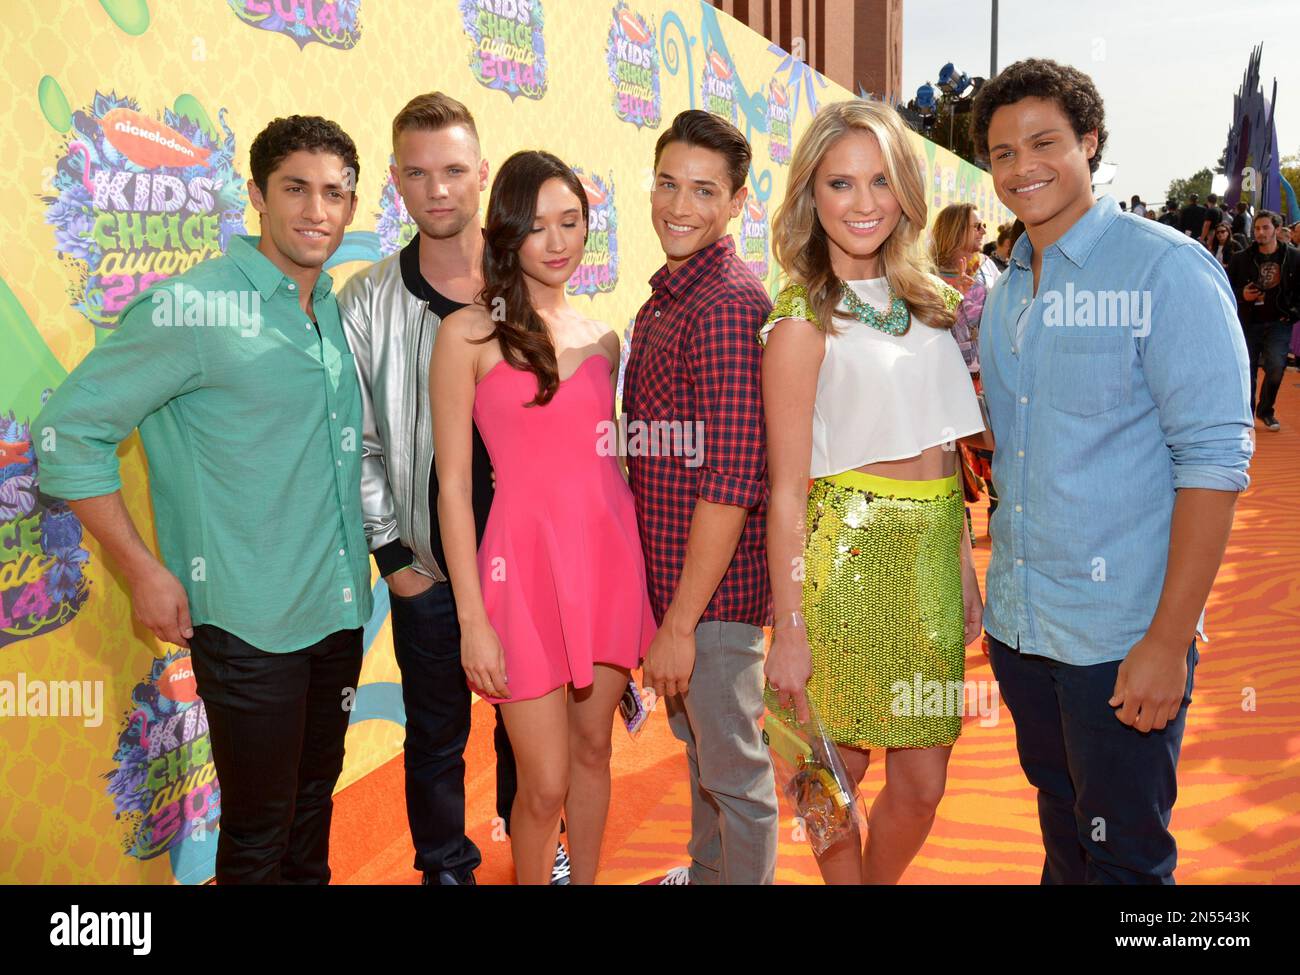 Azim Rizk, and from left, Cameron Jebo, Christina Masterson, Andrew Gray,  Ciara Hanna and John Mark of the Loudermilk of Mighty Morphin Power Rangers  arrive at the 27th annual Kids' Choice Awards